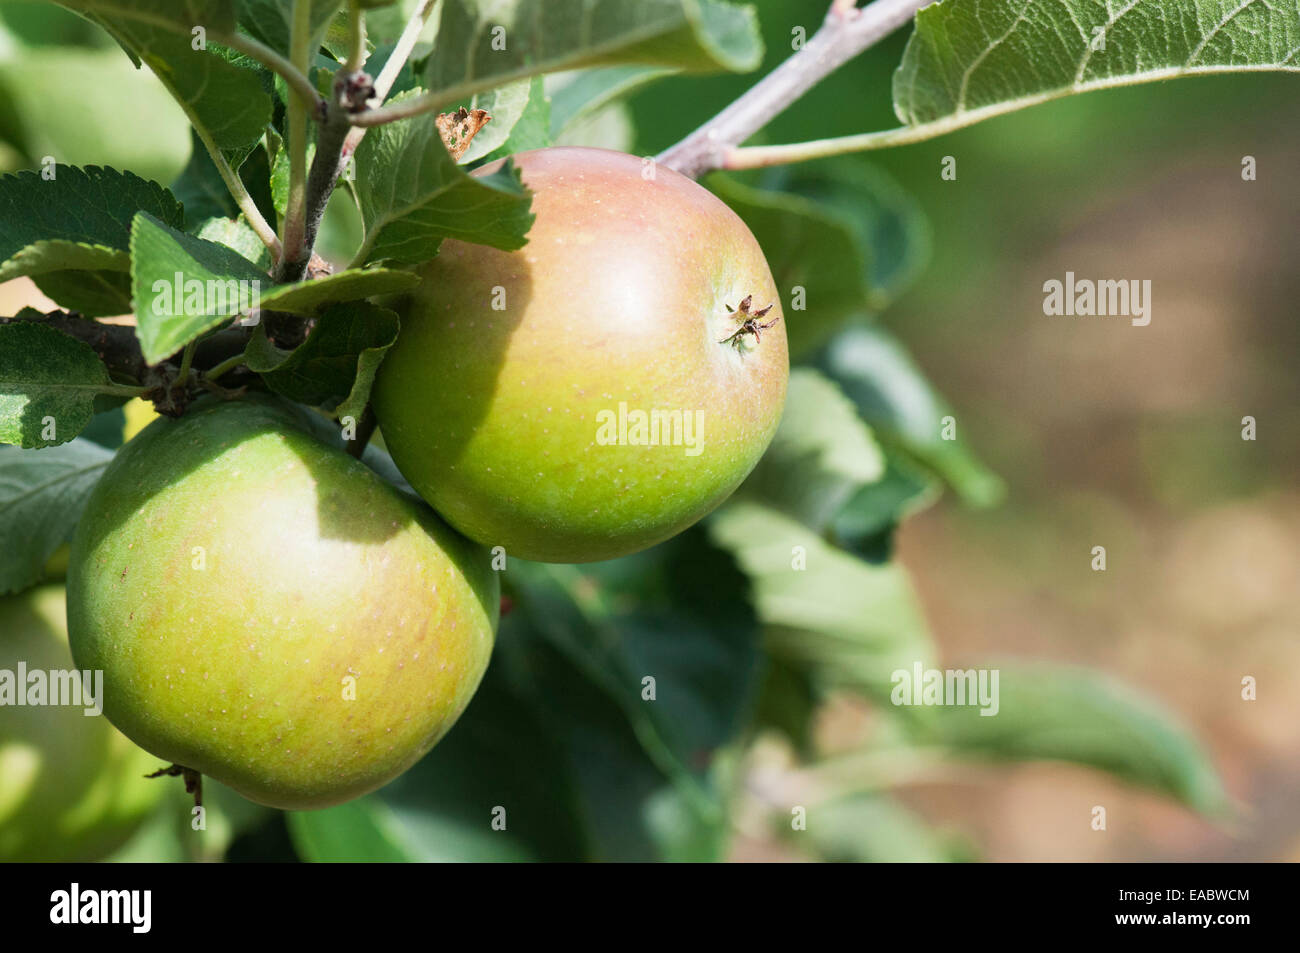 Apple, Malus domestica 'Lord Lambourne', Red subject, Green background. Stock Photo